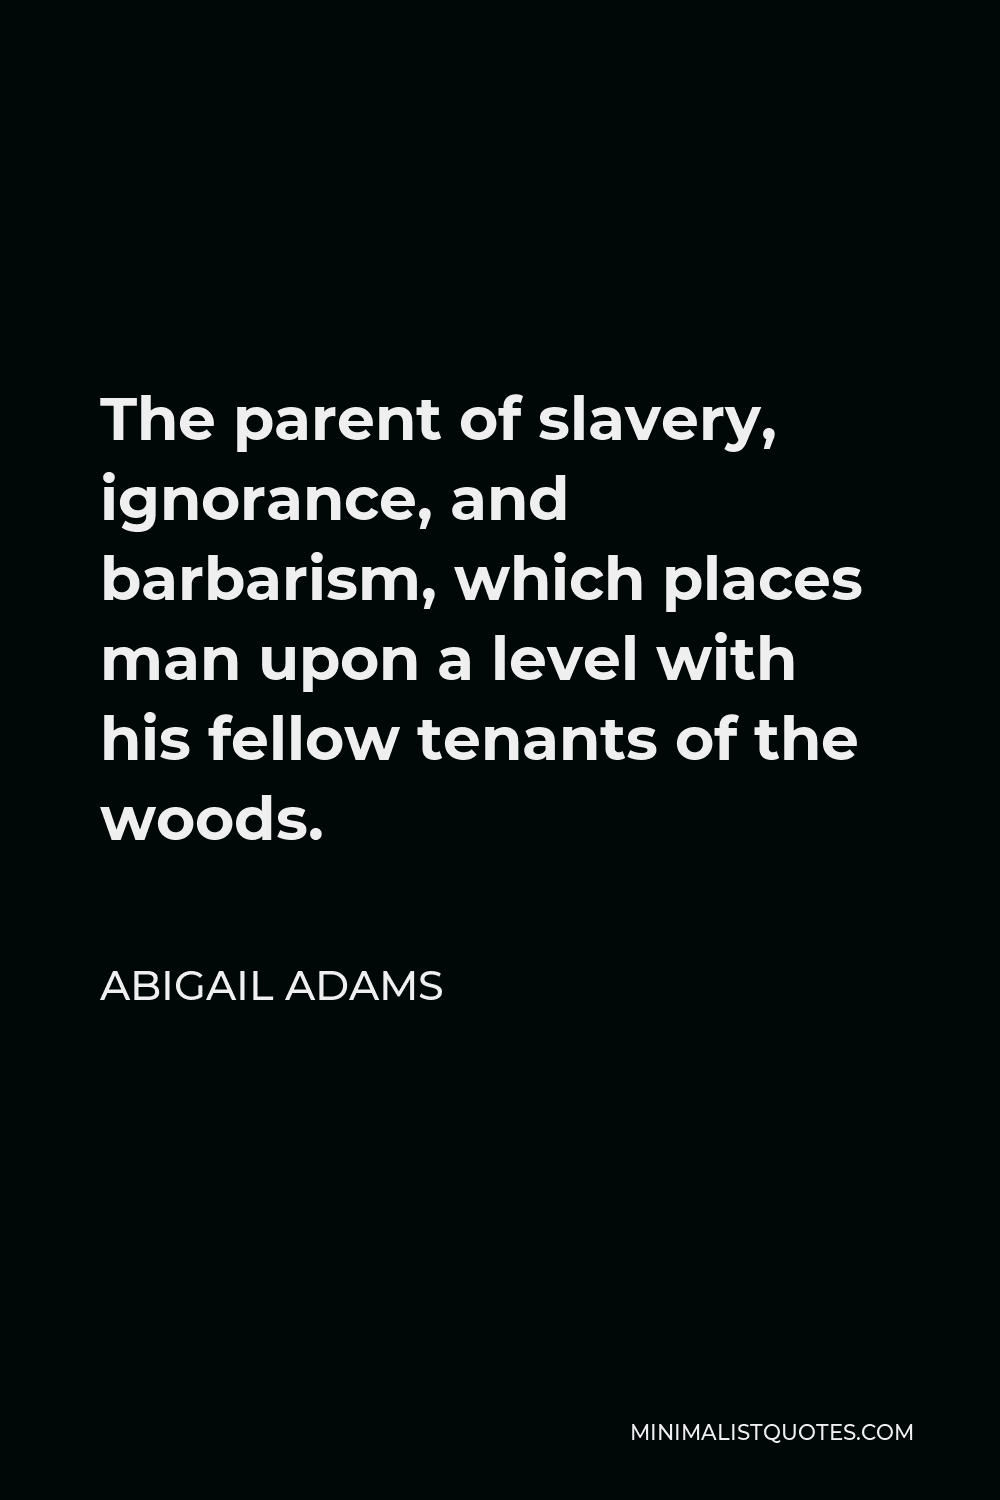 Abigail Adams Quote - The parent of slavery, ignorance, and barbarism, which places man upon a level with his fellow tenants of the woods.